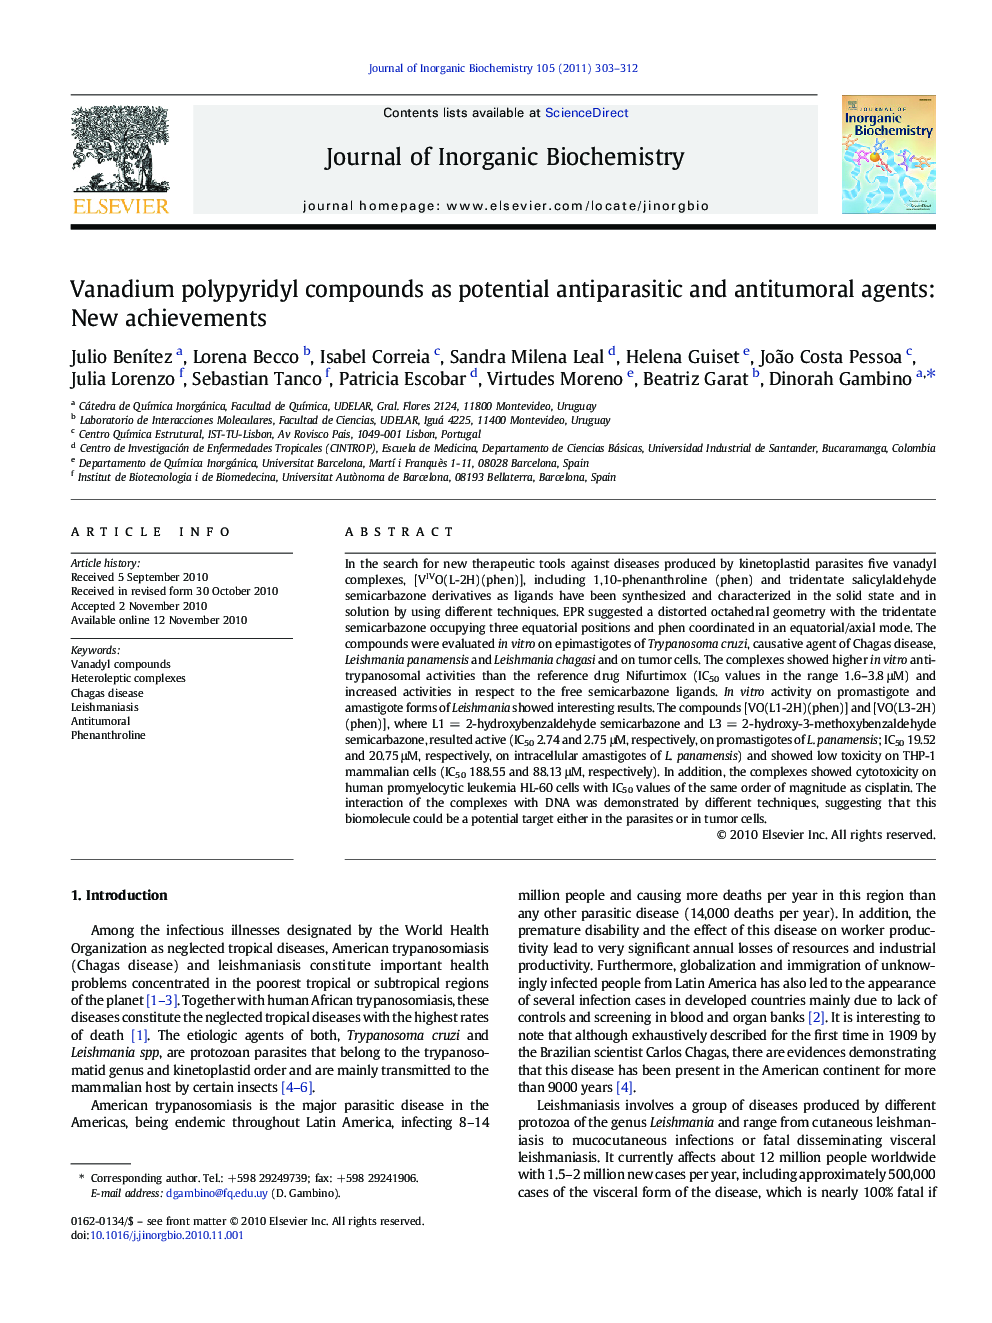 Vanadium polypyridyl compounds as potential antiparasitic and antitumoral agents: New achievements